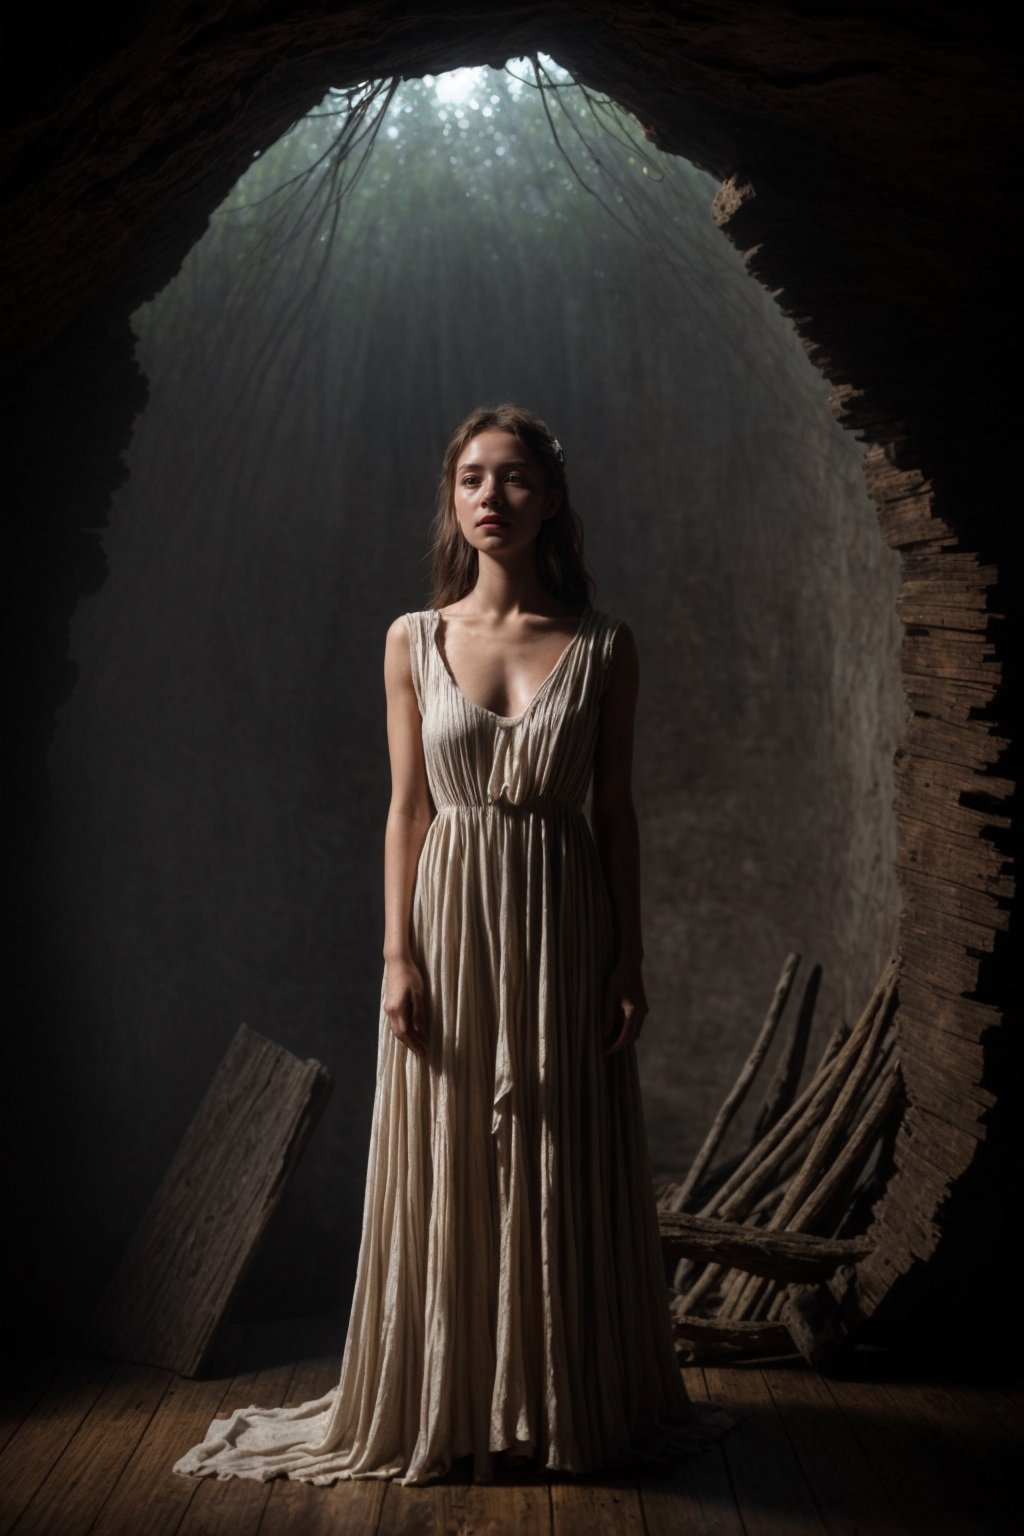 A mesmerizing woman in a gossamer, off-white dress emerges as the central focal point of a dimly lit, cavernous interior of an aged wooden hut. Her lustrous, chestnut hair cascades in unruly waves, framing a face of porcelain-like clarity. Deep-set hazel eyes, intense and penetrating, seem to shimmer with an inner light. Her lips, slightly parted, carry a shade of muted rose, and her skin, flawless and luminescent, stands in stark juxtaposition to the rugged environment.

The backdrop is dominated by time-worn wooden logs and planks, their textures rough and grooved from years of exposure to the elements. Cobwebs, barely visible, cling to the corners, hinting at the passage of time and neglect. In the forefront, remnants of ashen wood rest, remnants of a fireplace, its purpose long forgotten. Adjacent to it, the hazy outlines of primitive tools and structures suggest traces of past habitation or arcane ceremonies.

The entirety of the scene is steeped in profound mysticism. Every intricate detail, from the subtle ripples in her dress to the spectral play of light and shadow, weaves a tale of enchantment, solitude, and timeless beauty.

You can also add additional keywords to your query, such as:

woman
dress
hut
forest
night
magic
mystery
enchantment
solitude
beauty